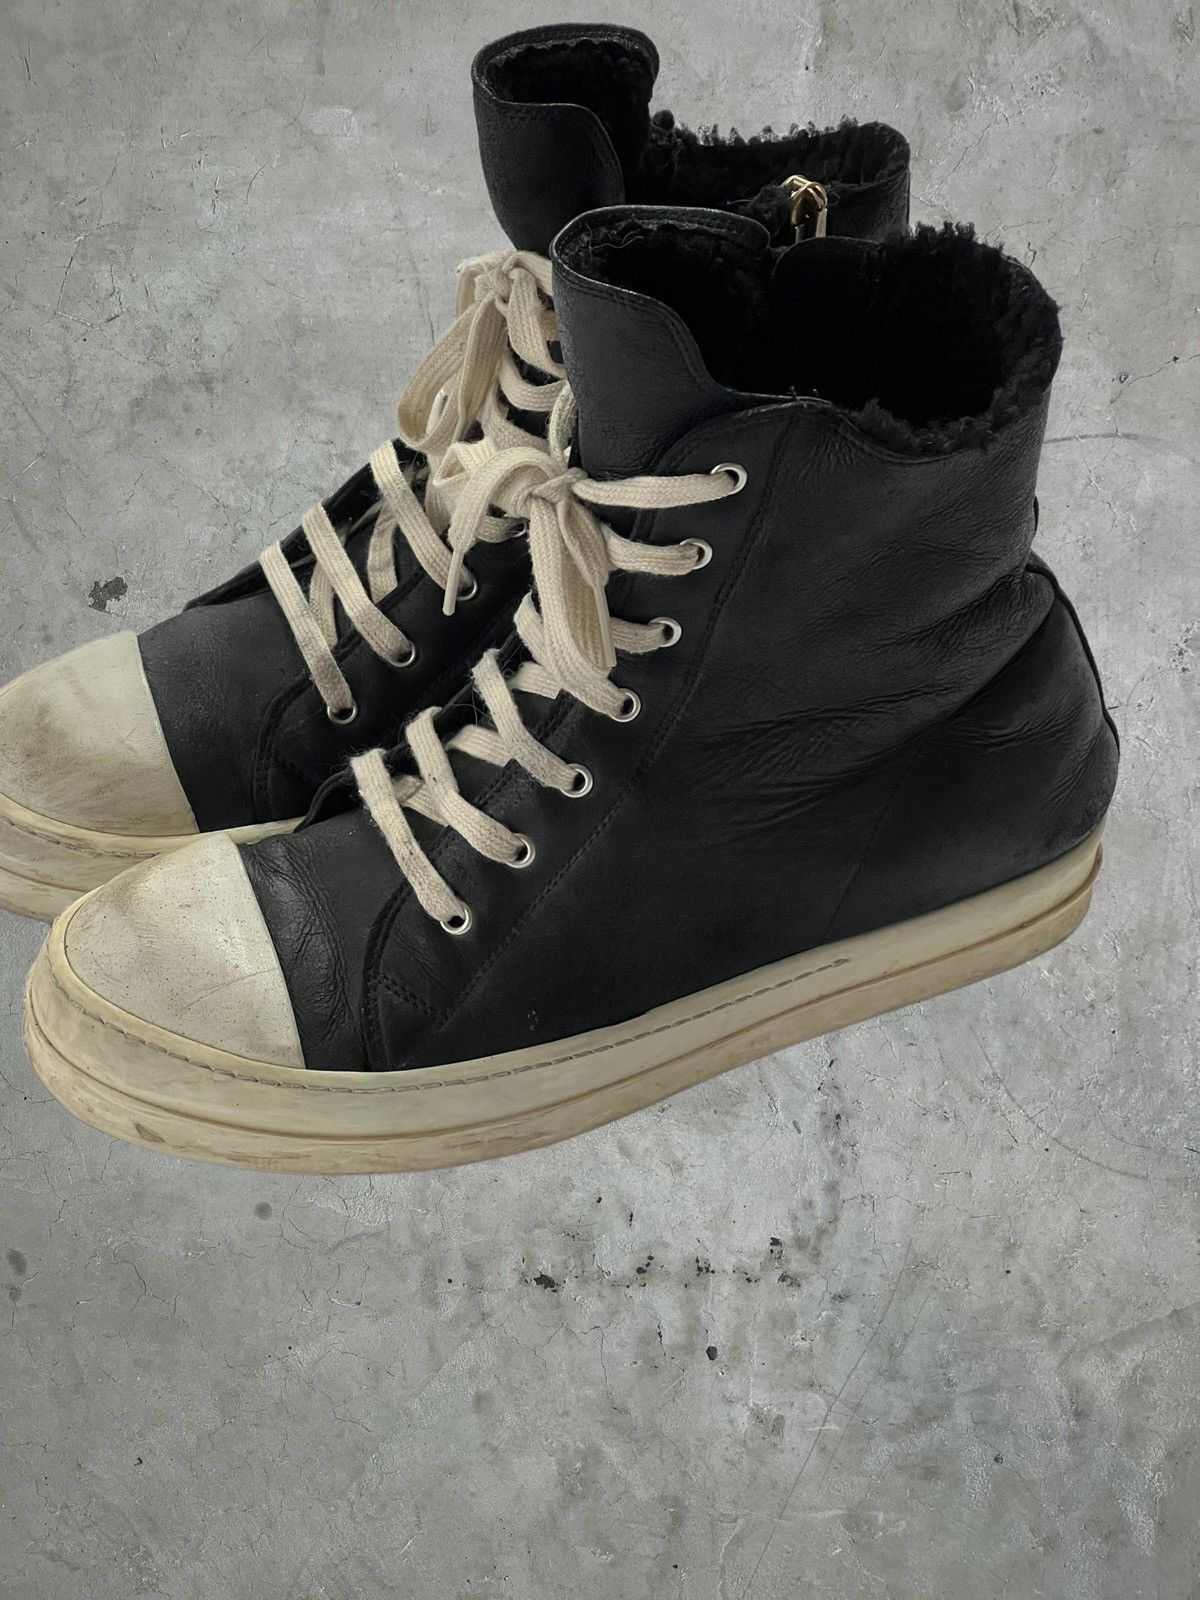 Rick Owens Rick Owens Mainline Leather / Shearling Ramones Size US 10 / EU 43 - 2 Preview